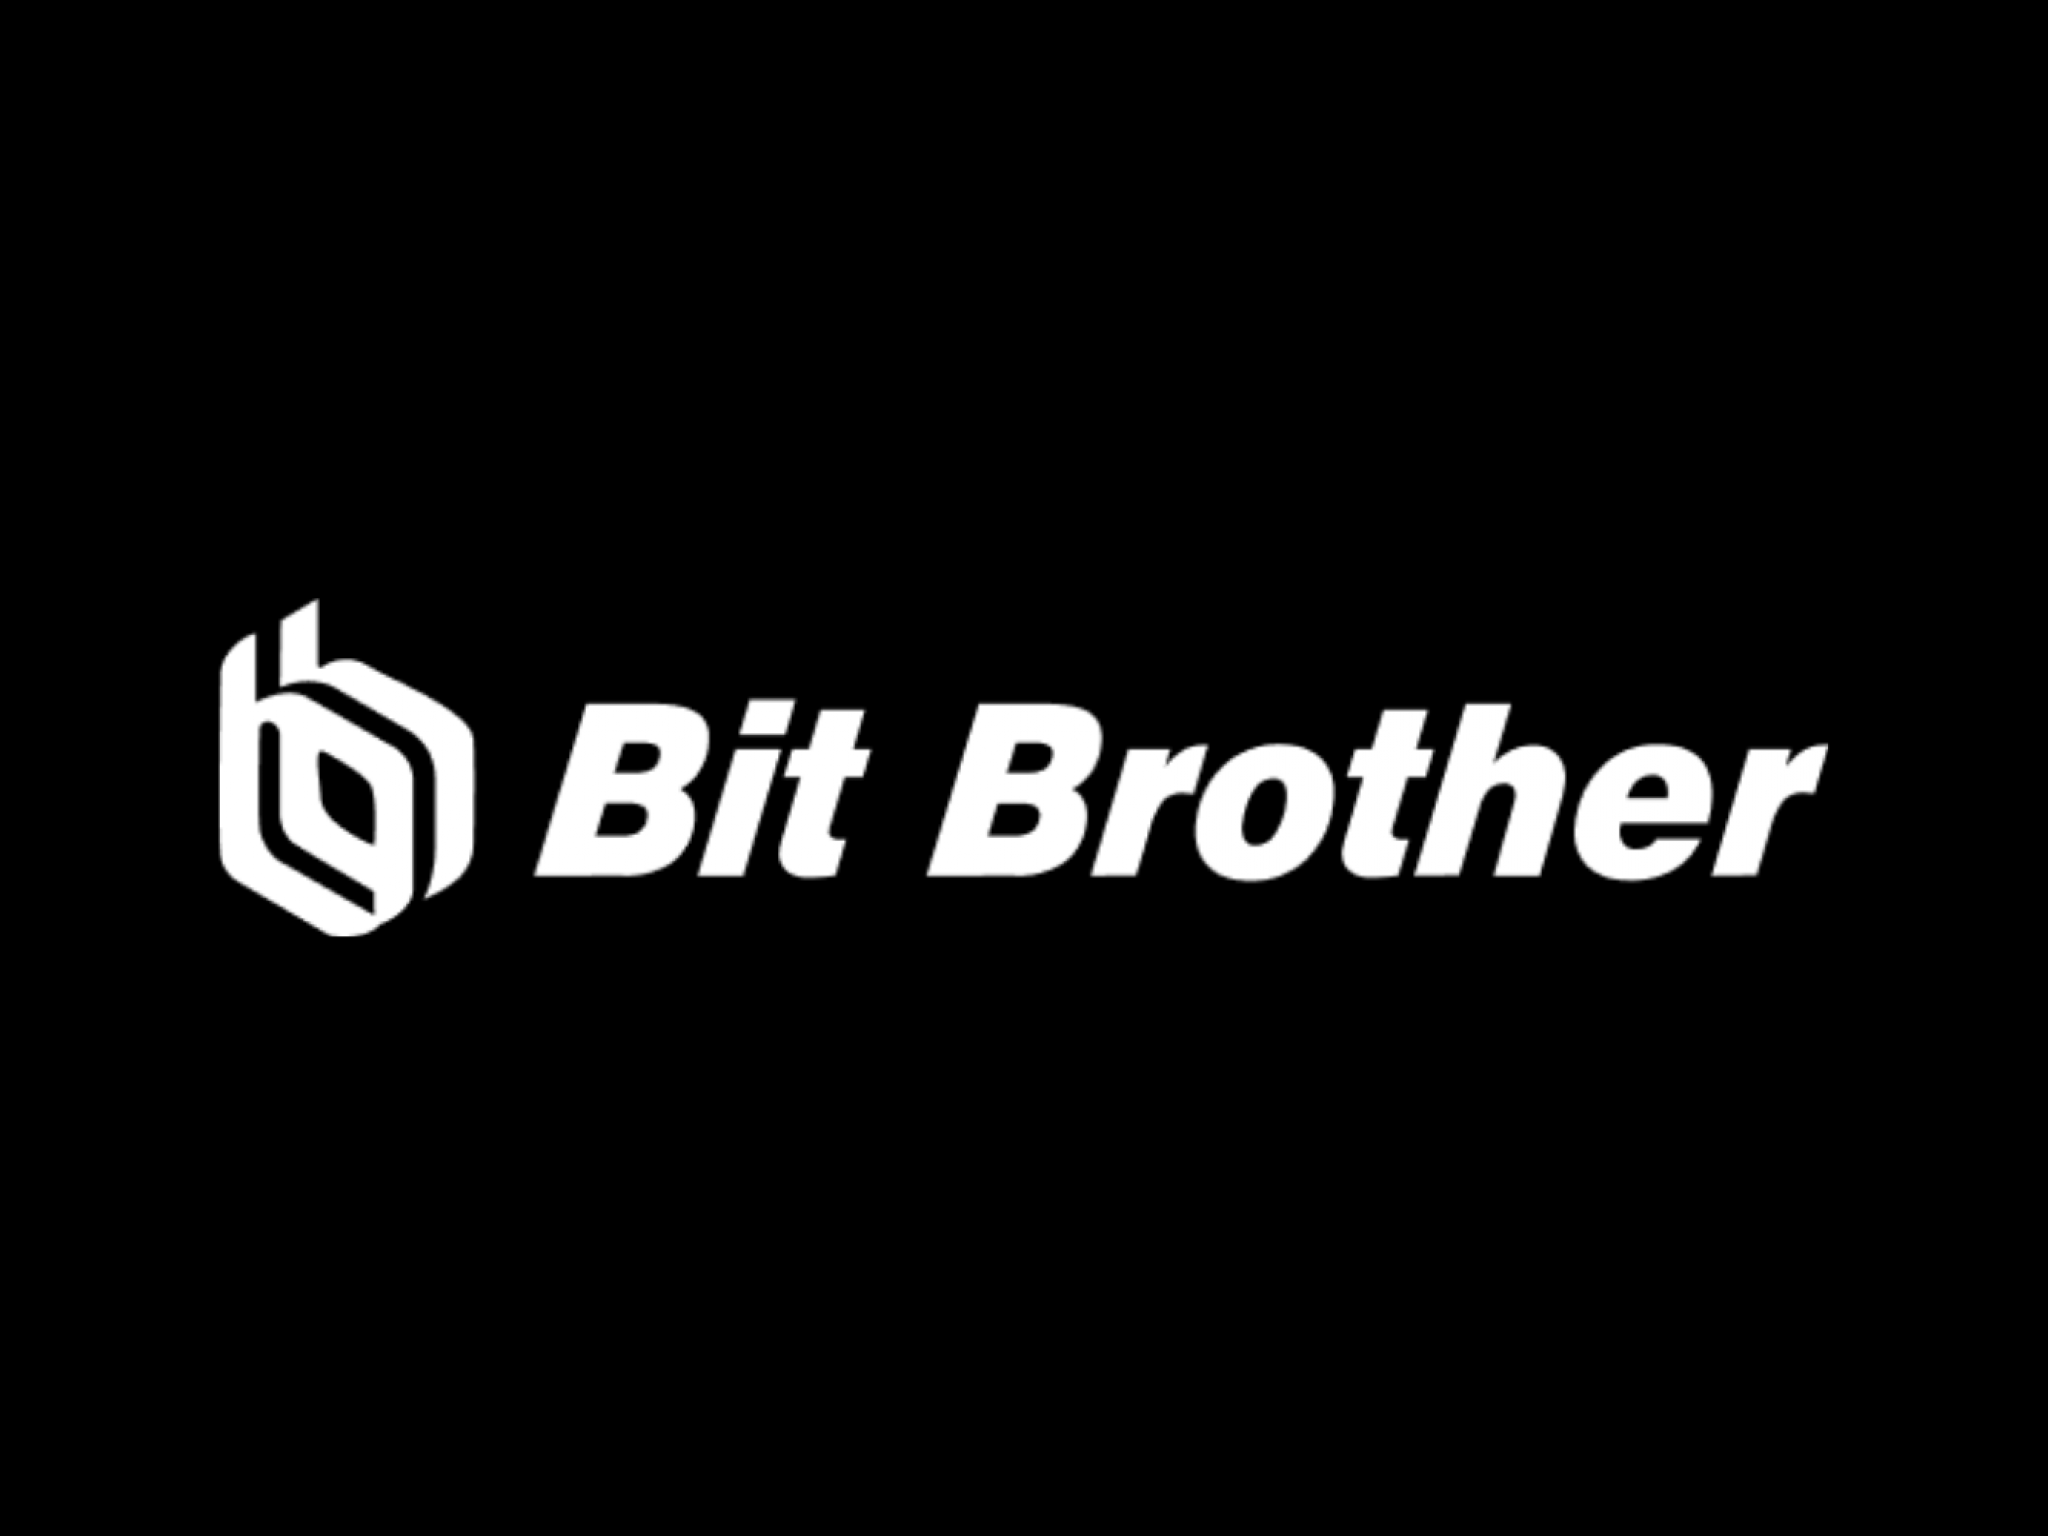  why-bit-brother-shares-are-trading-lower-friday 